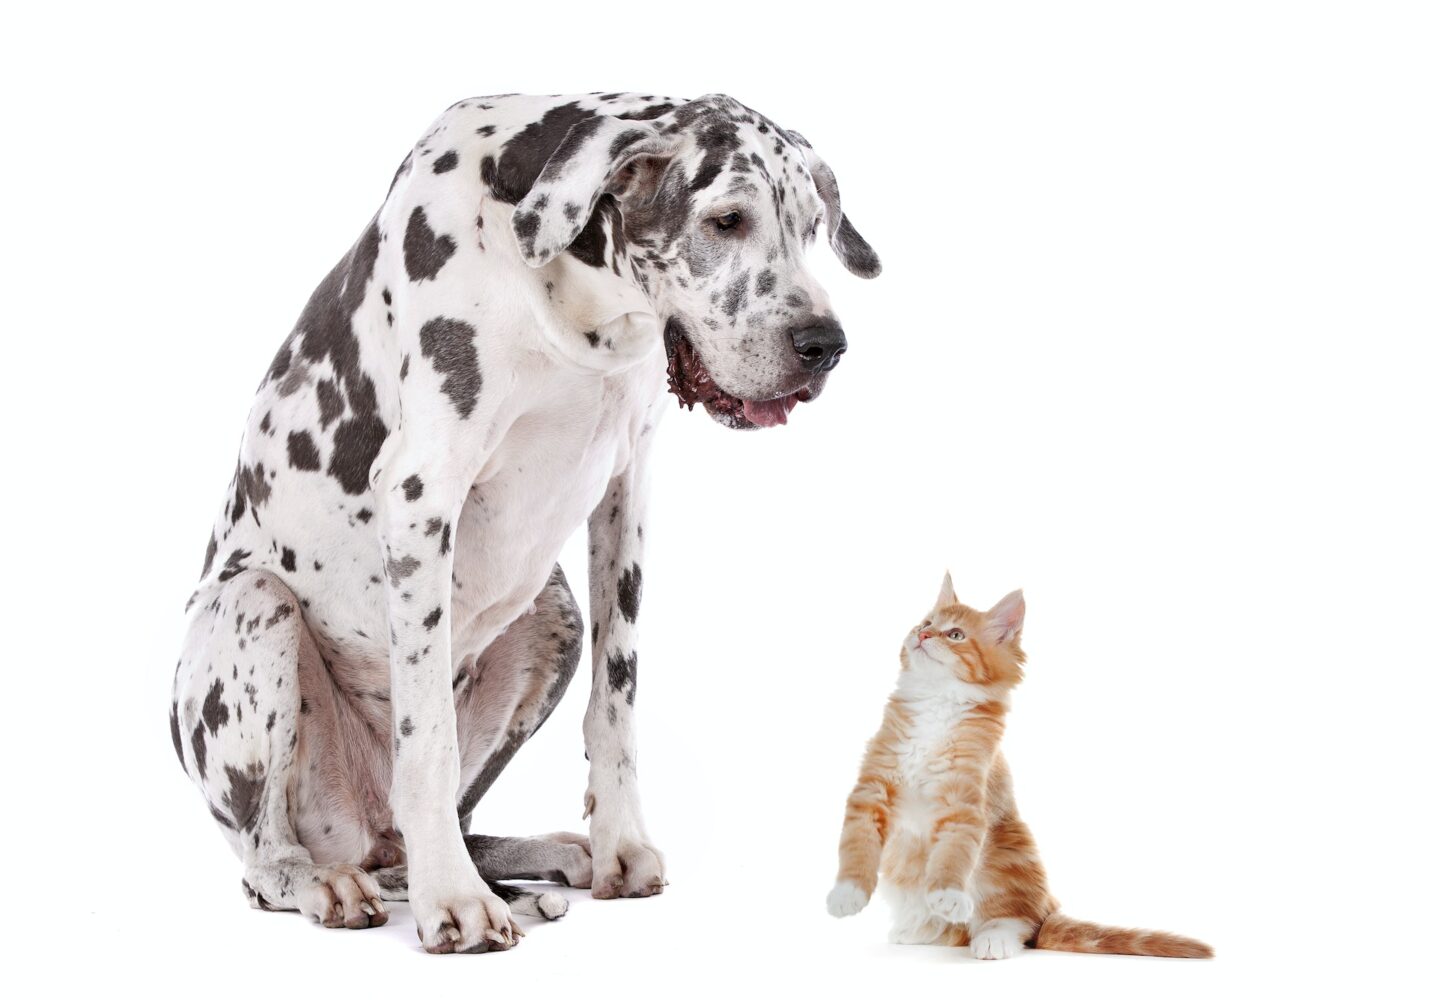 A dog and a cat